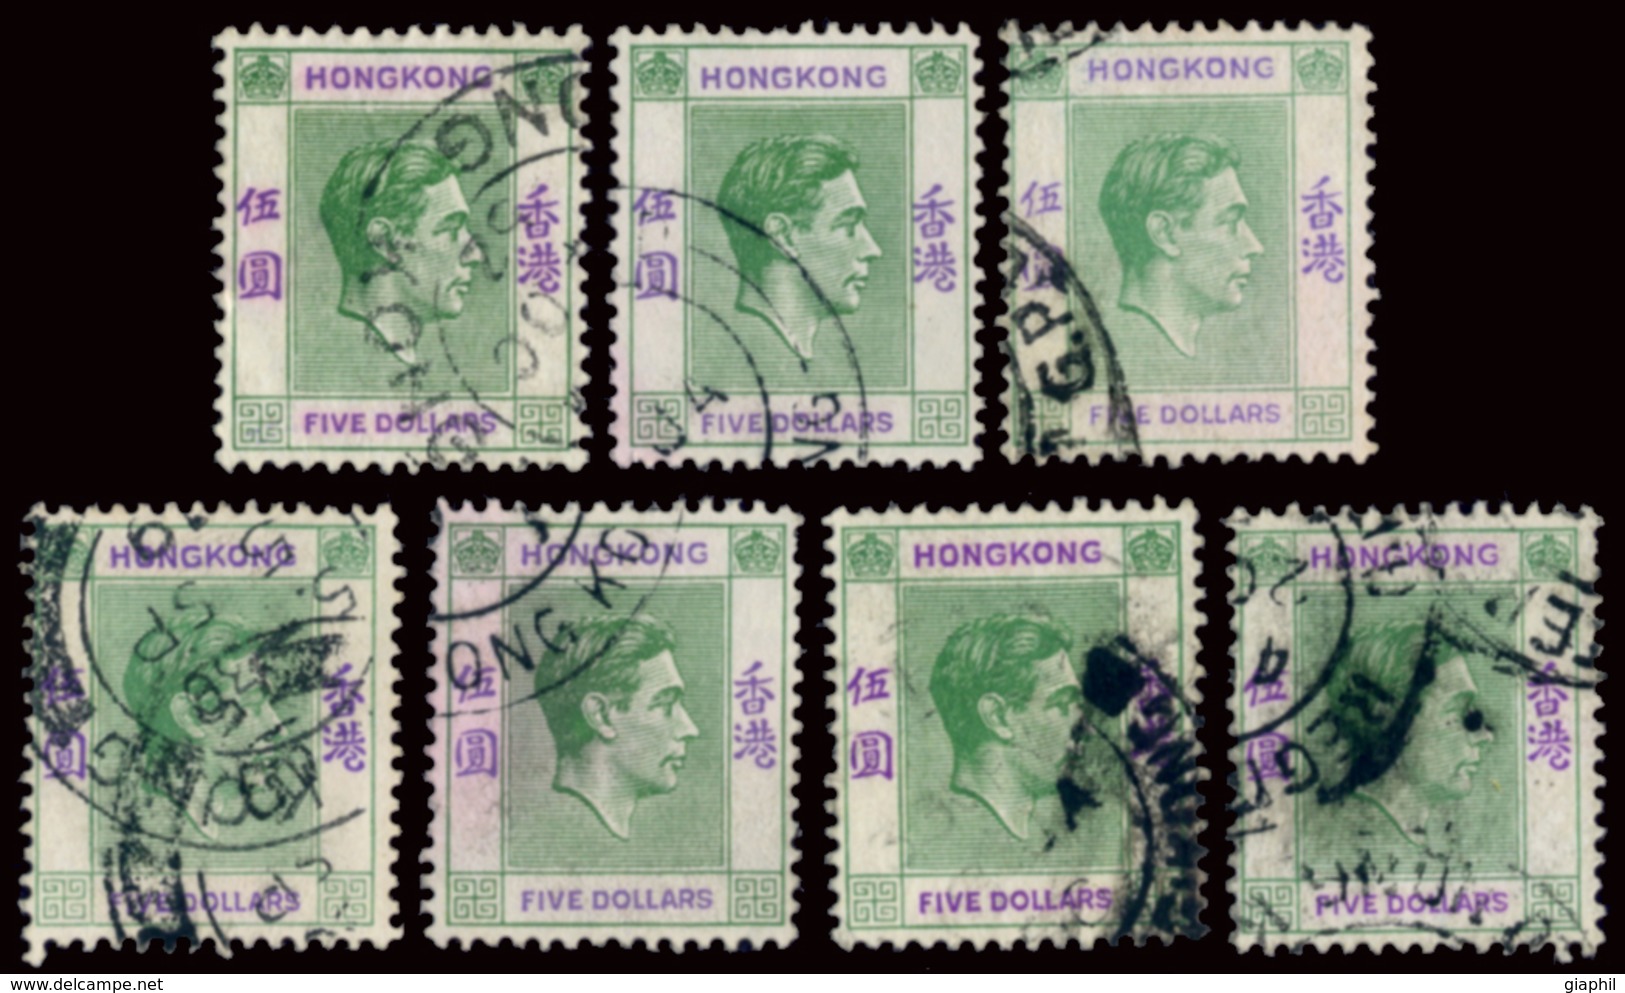 HONG KONG 1938-52 5 $ 7 EXAMPLES (SG 160) USED OFFER! - Oblitérés